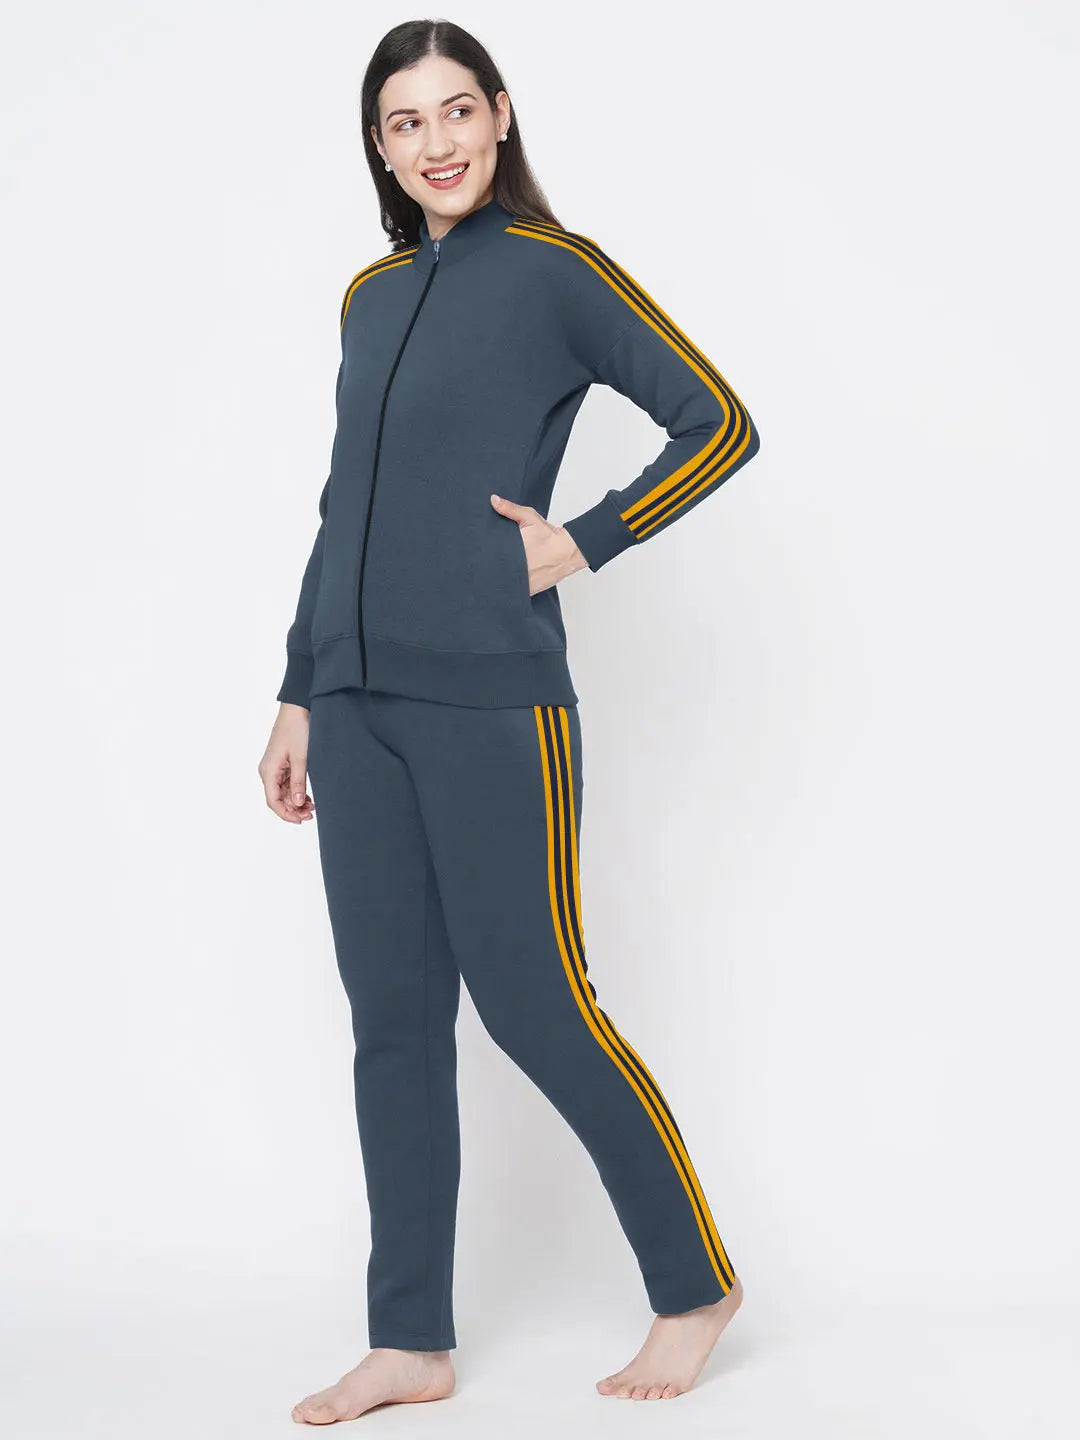 Louis Vicaci Fleece Zipper Tracksuit For Ladies-Light Navy with Yellow Stripe-BE17331 Louis Vicaci